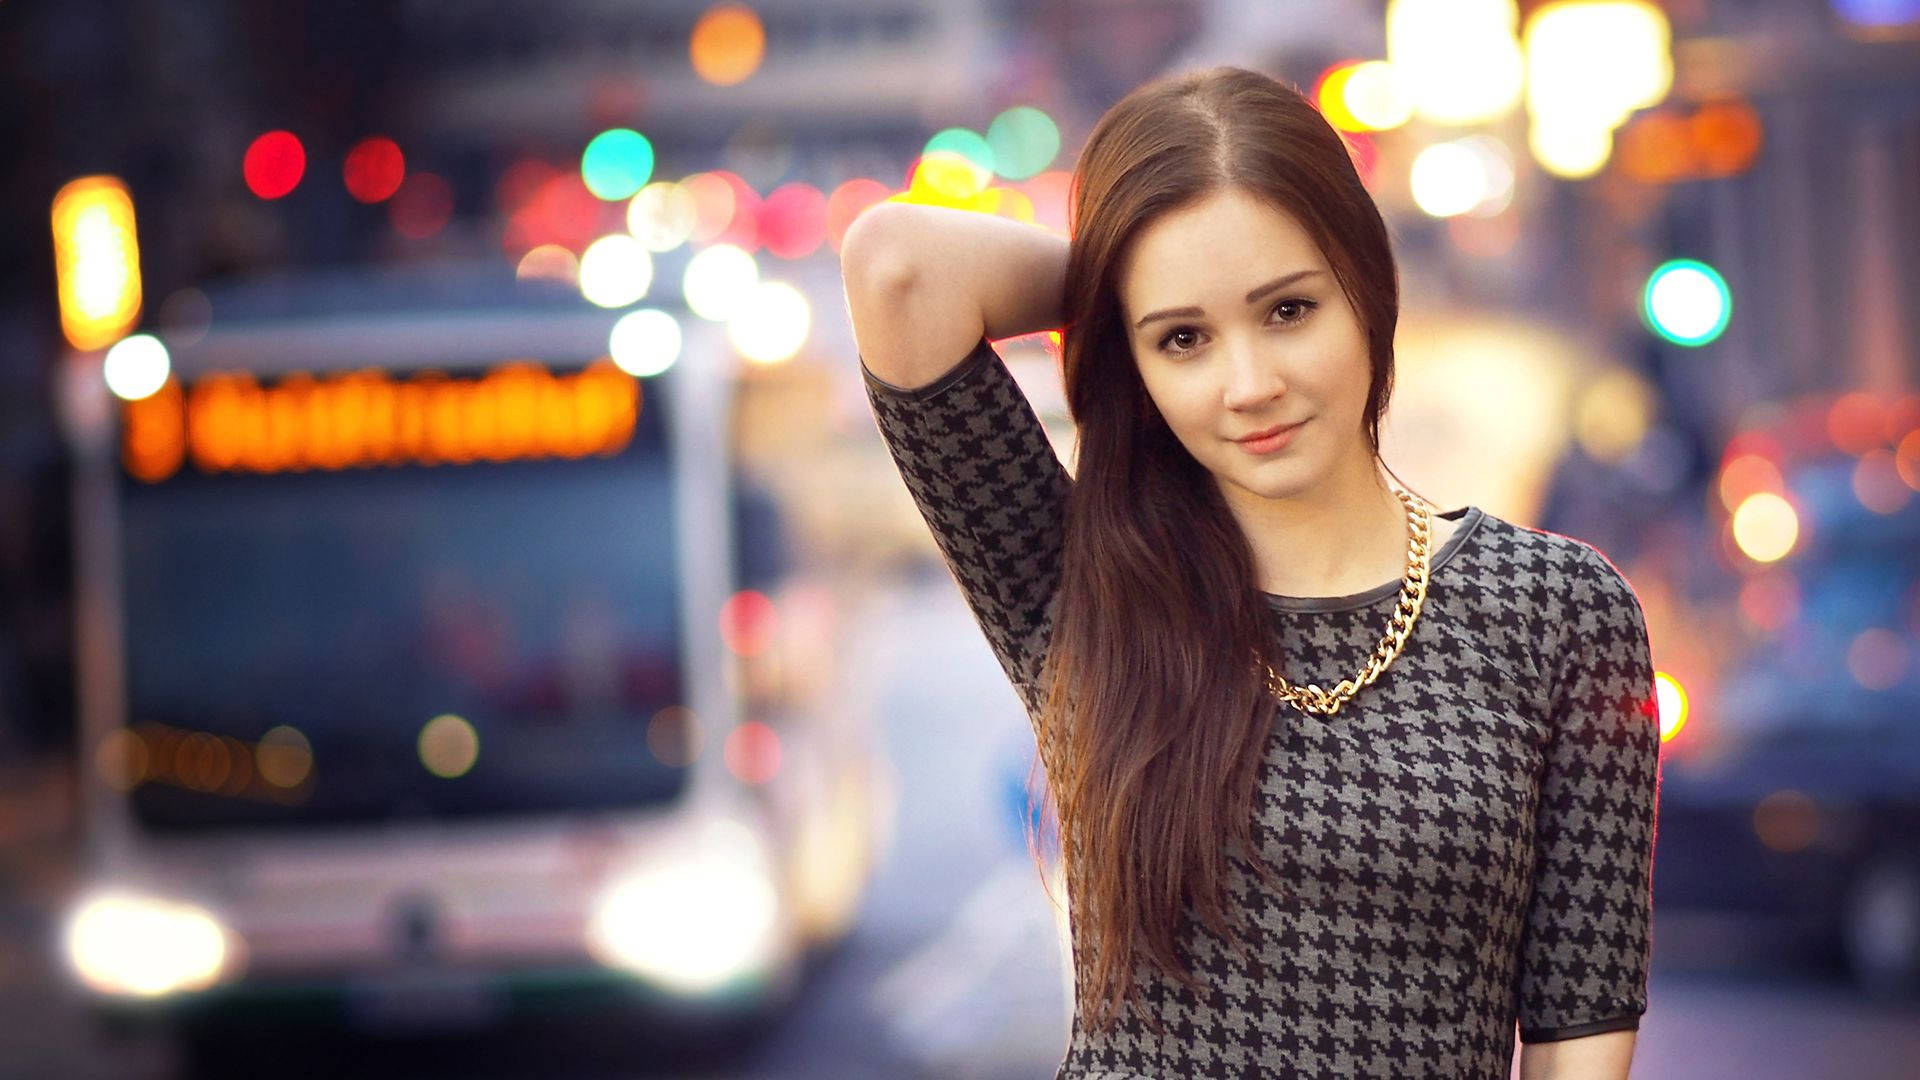 Beautiful Girl In The City Background